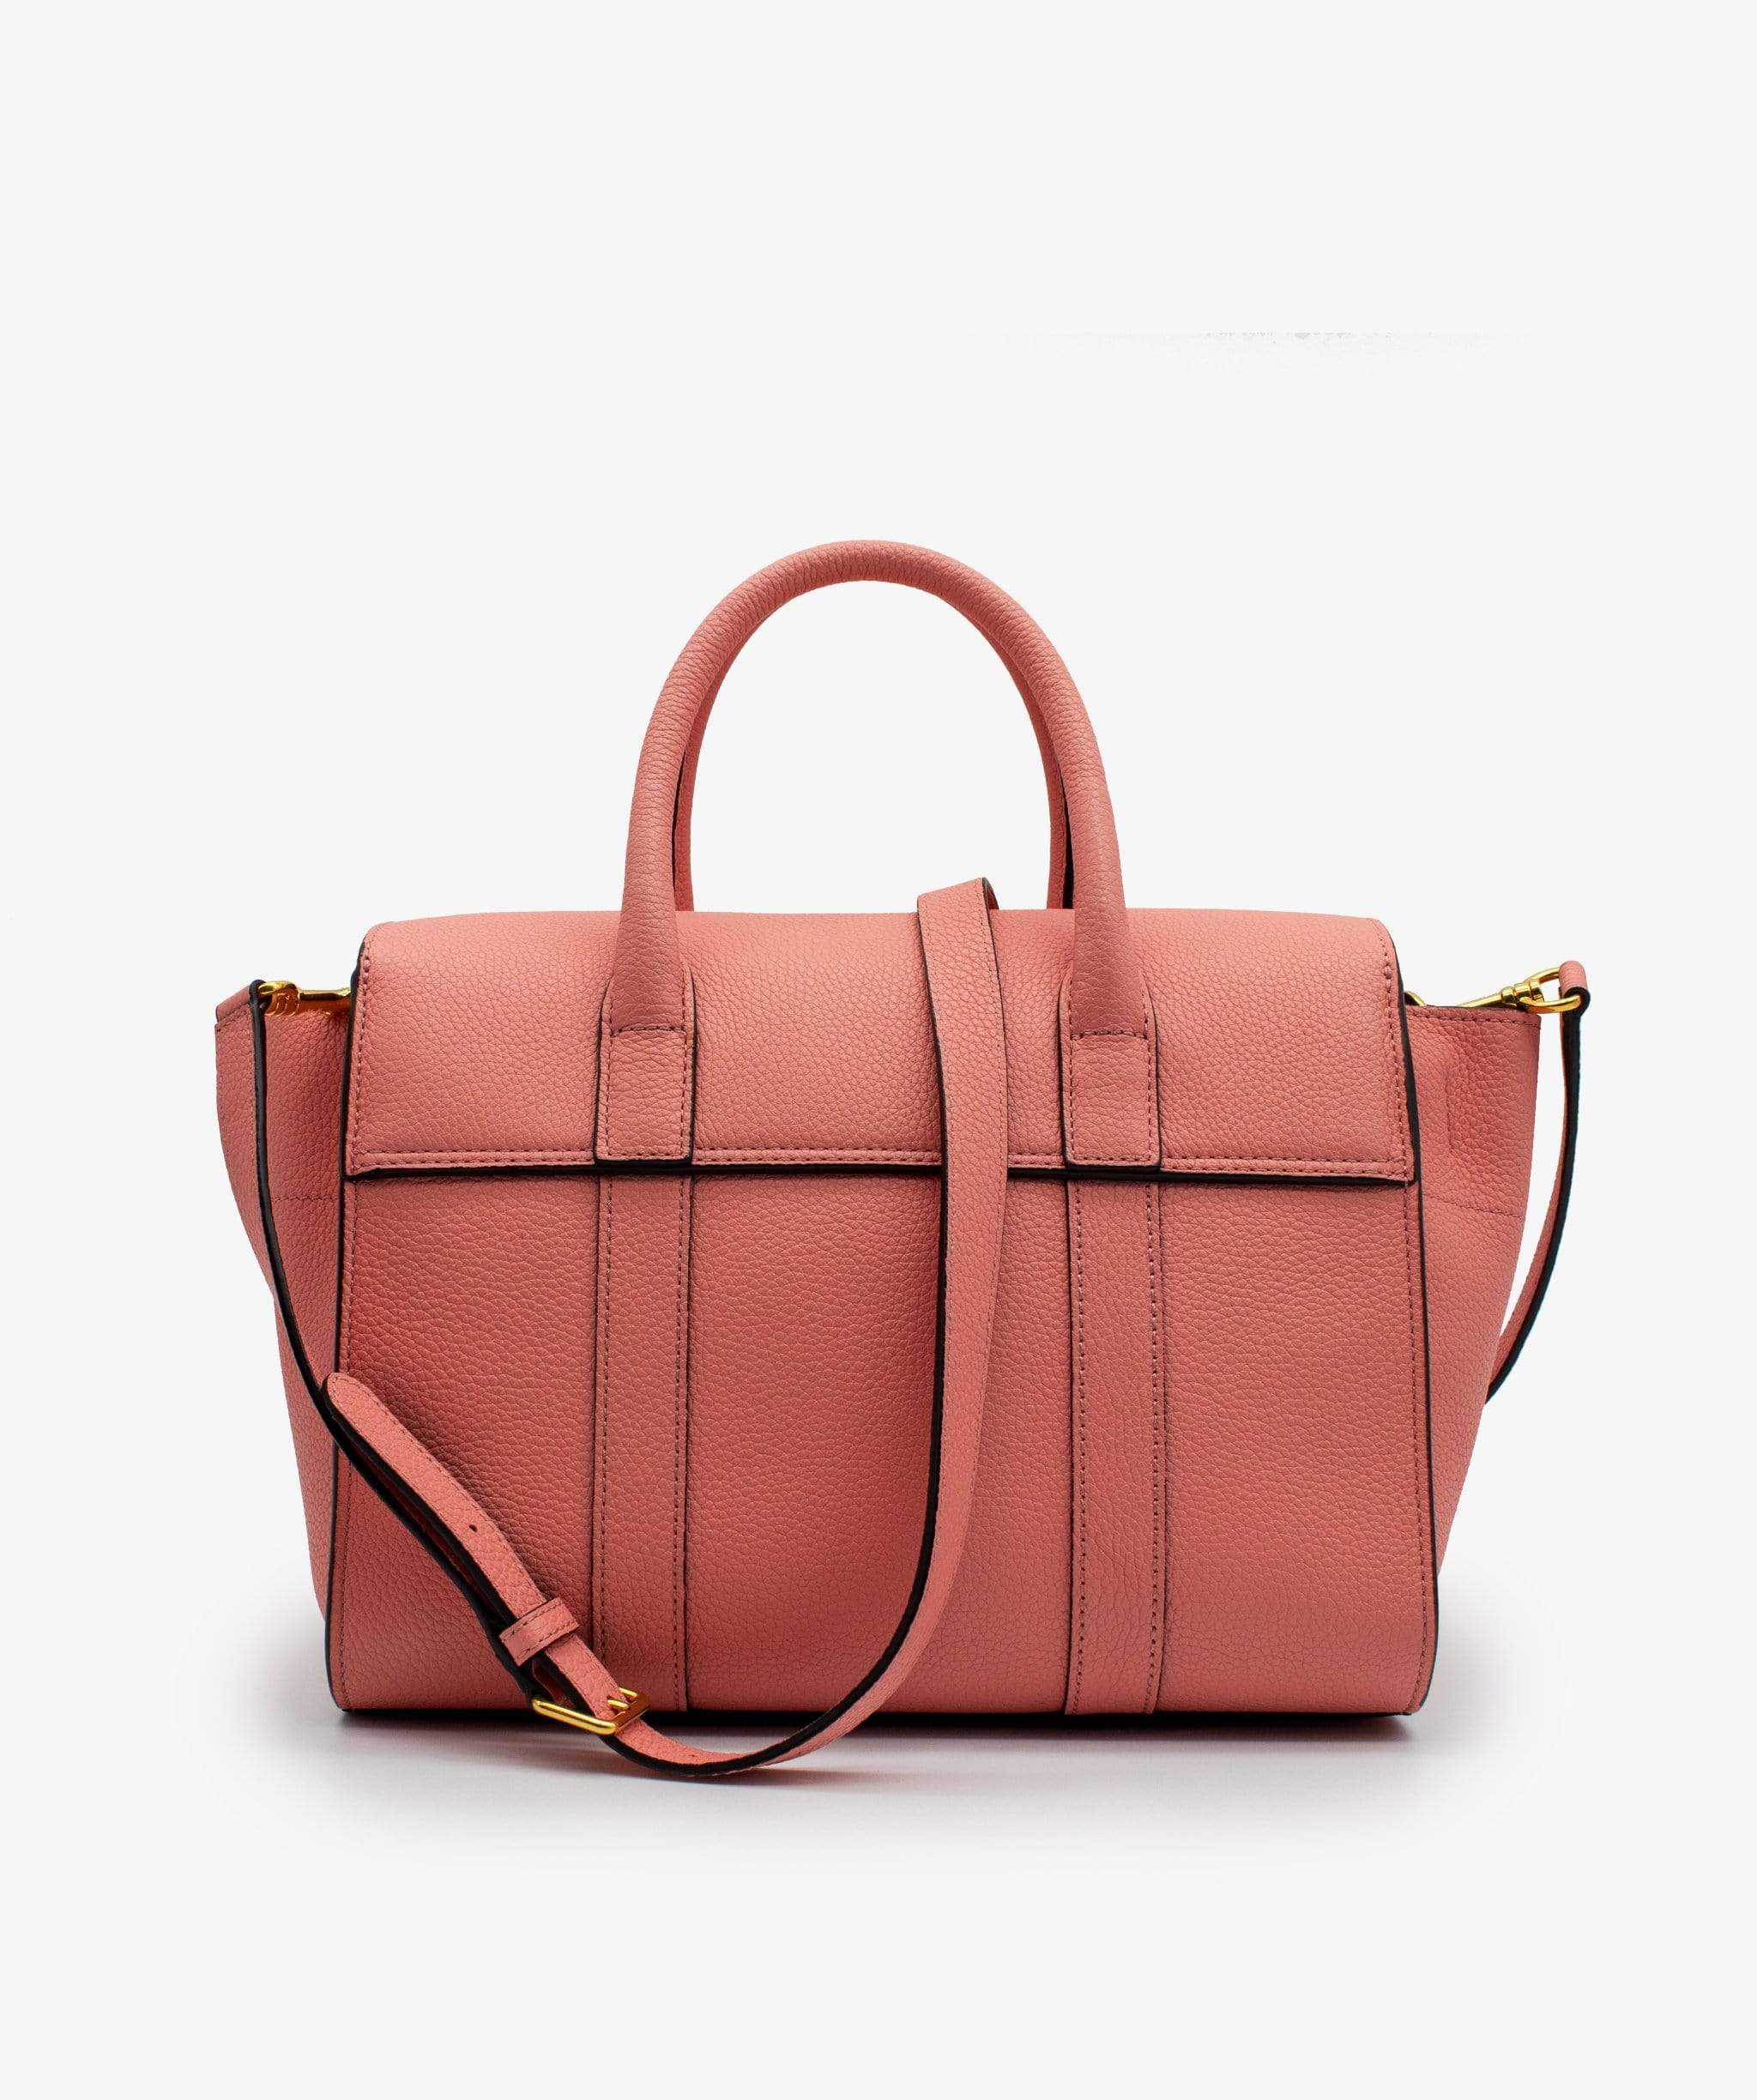 Mulberry Mulberry Pink Bayswater Bag